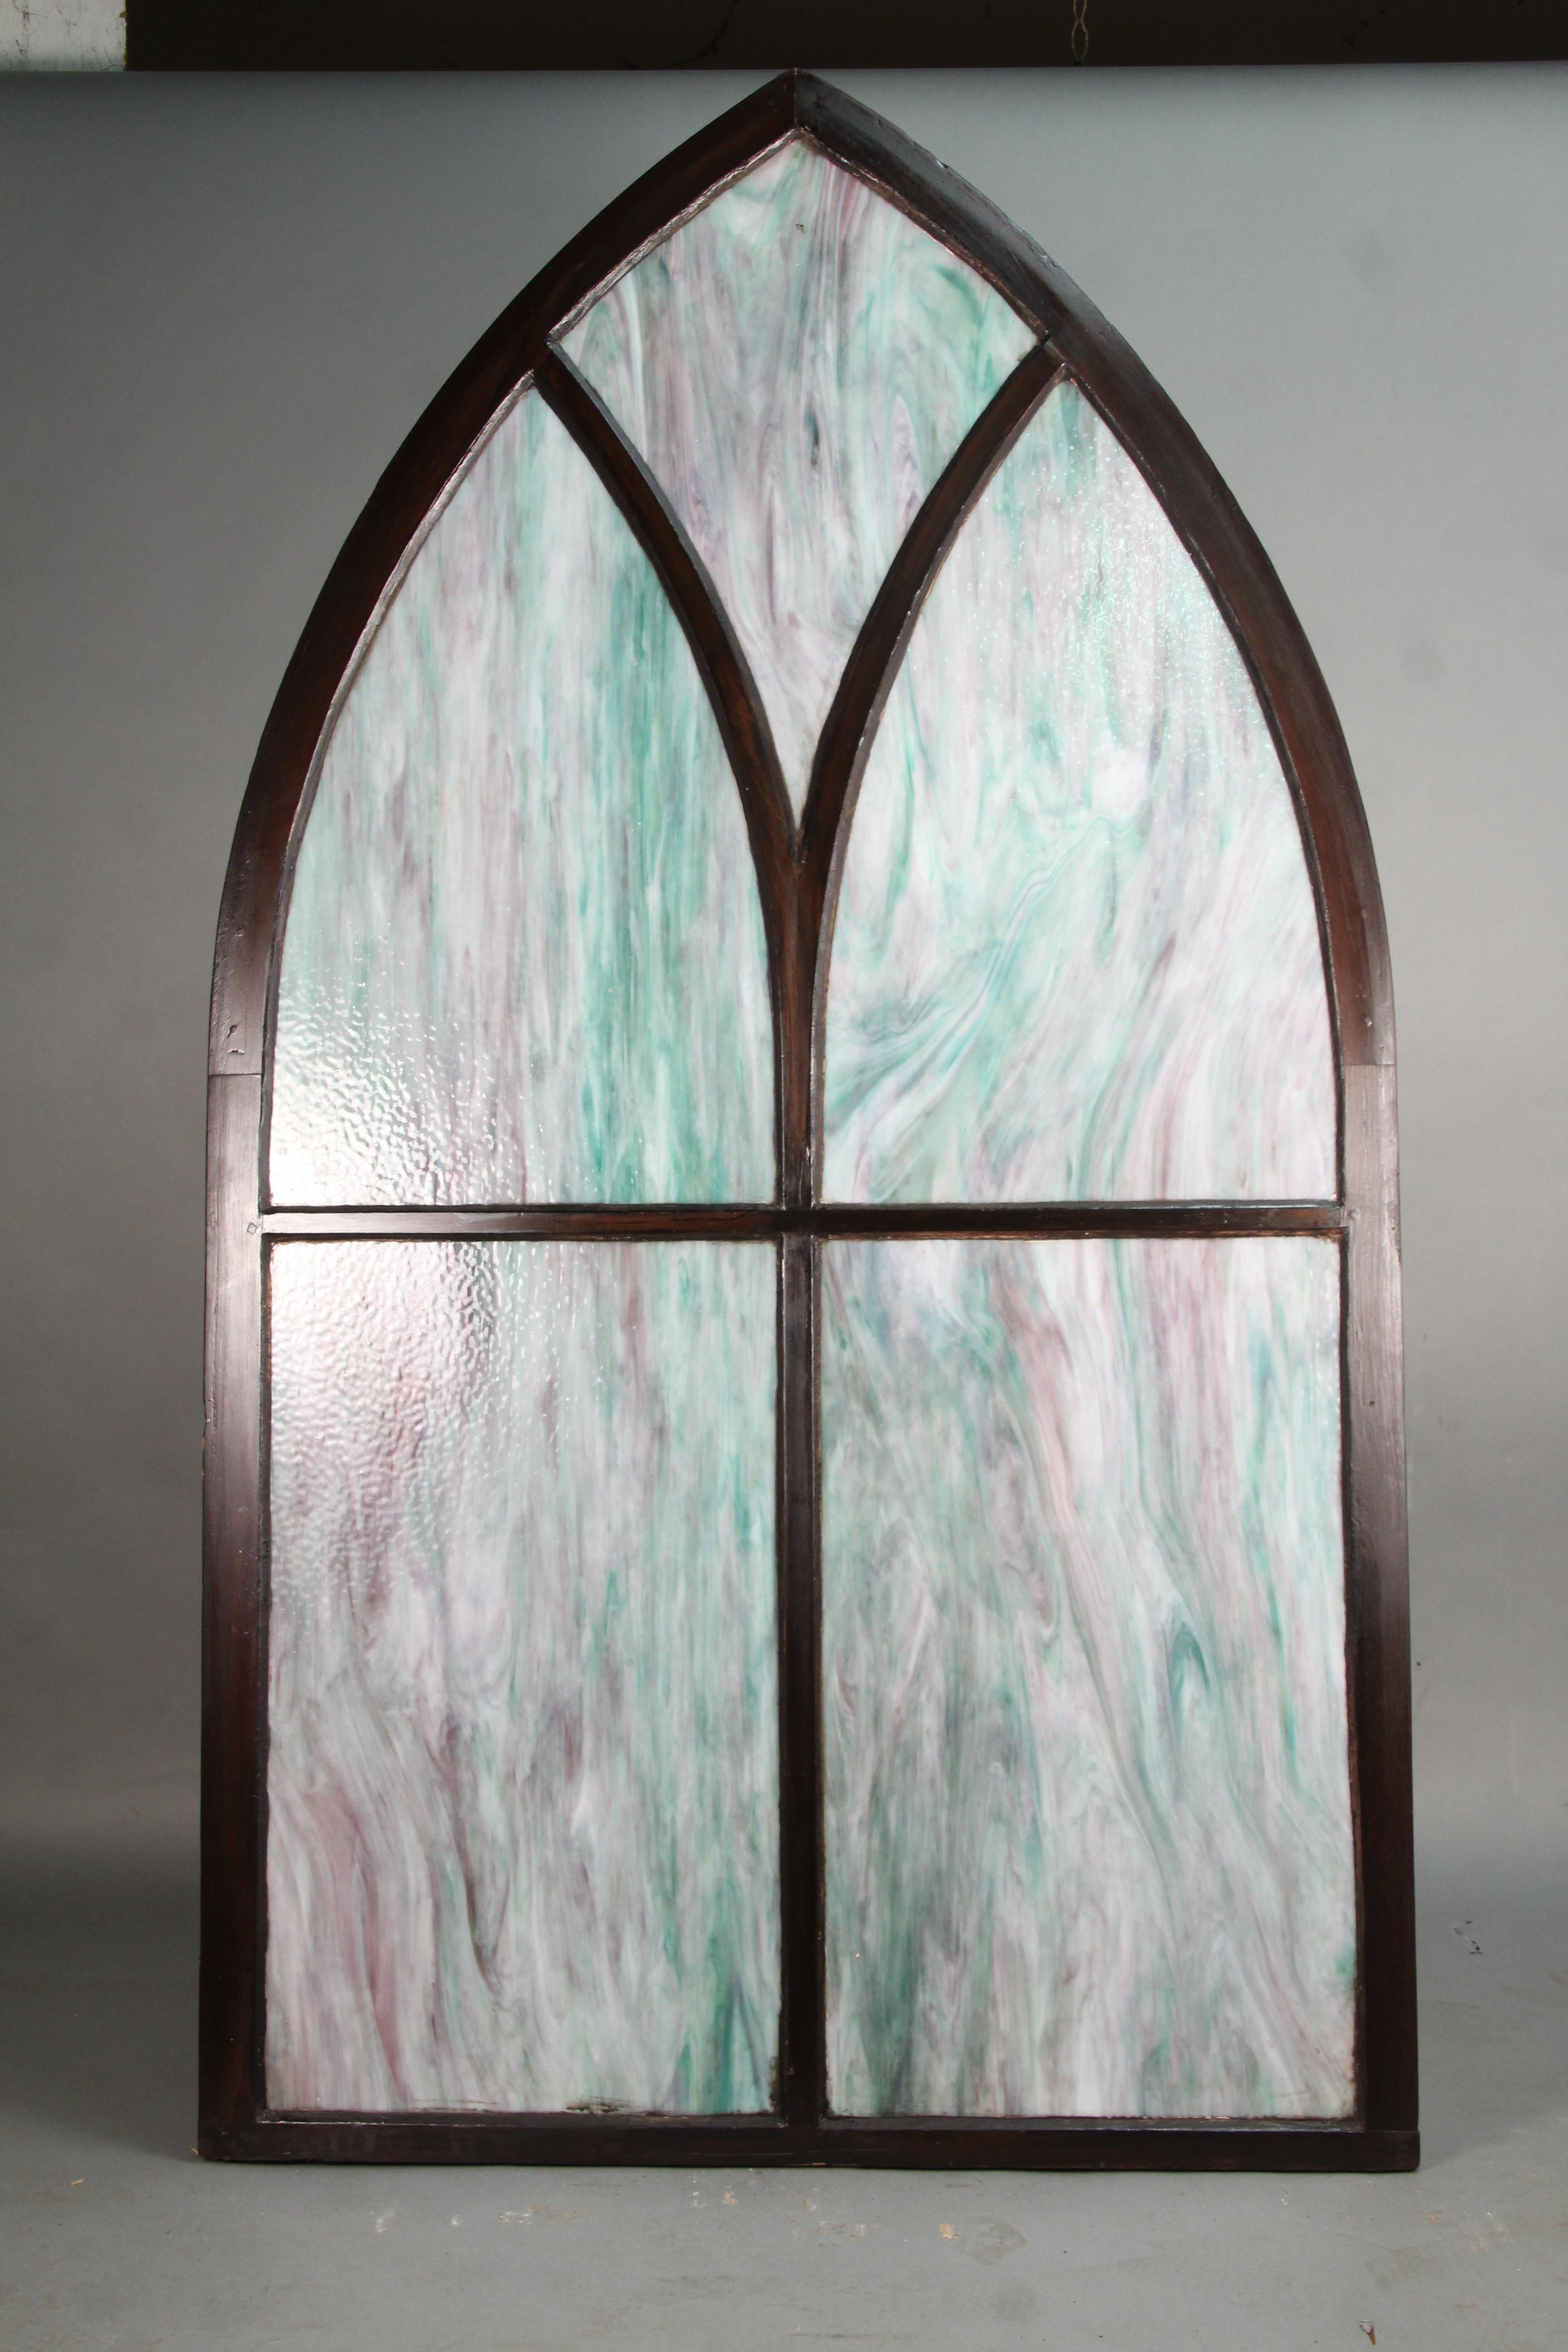 Sold and priced individually, circa 1900s peaked stained glass window. Wonderful glass. One panel has a crack.